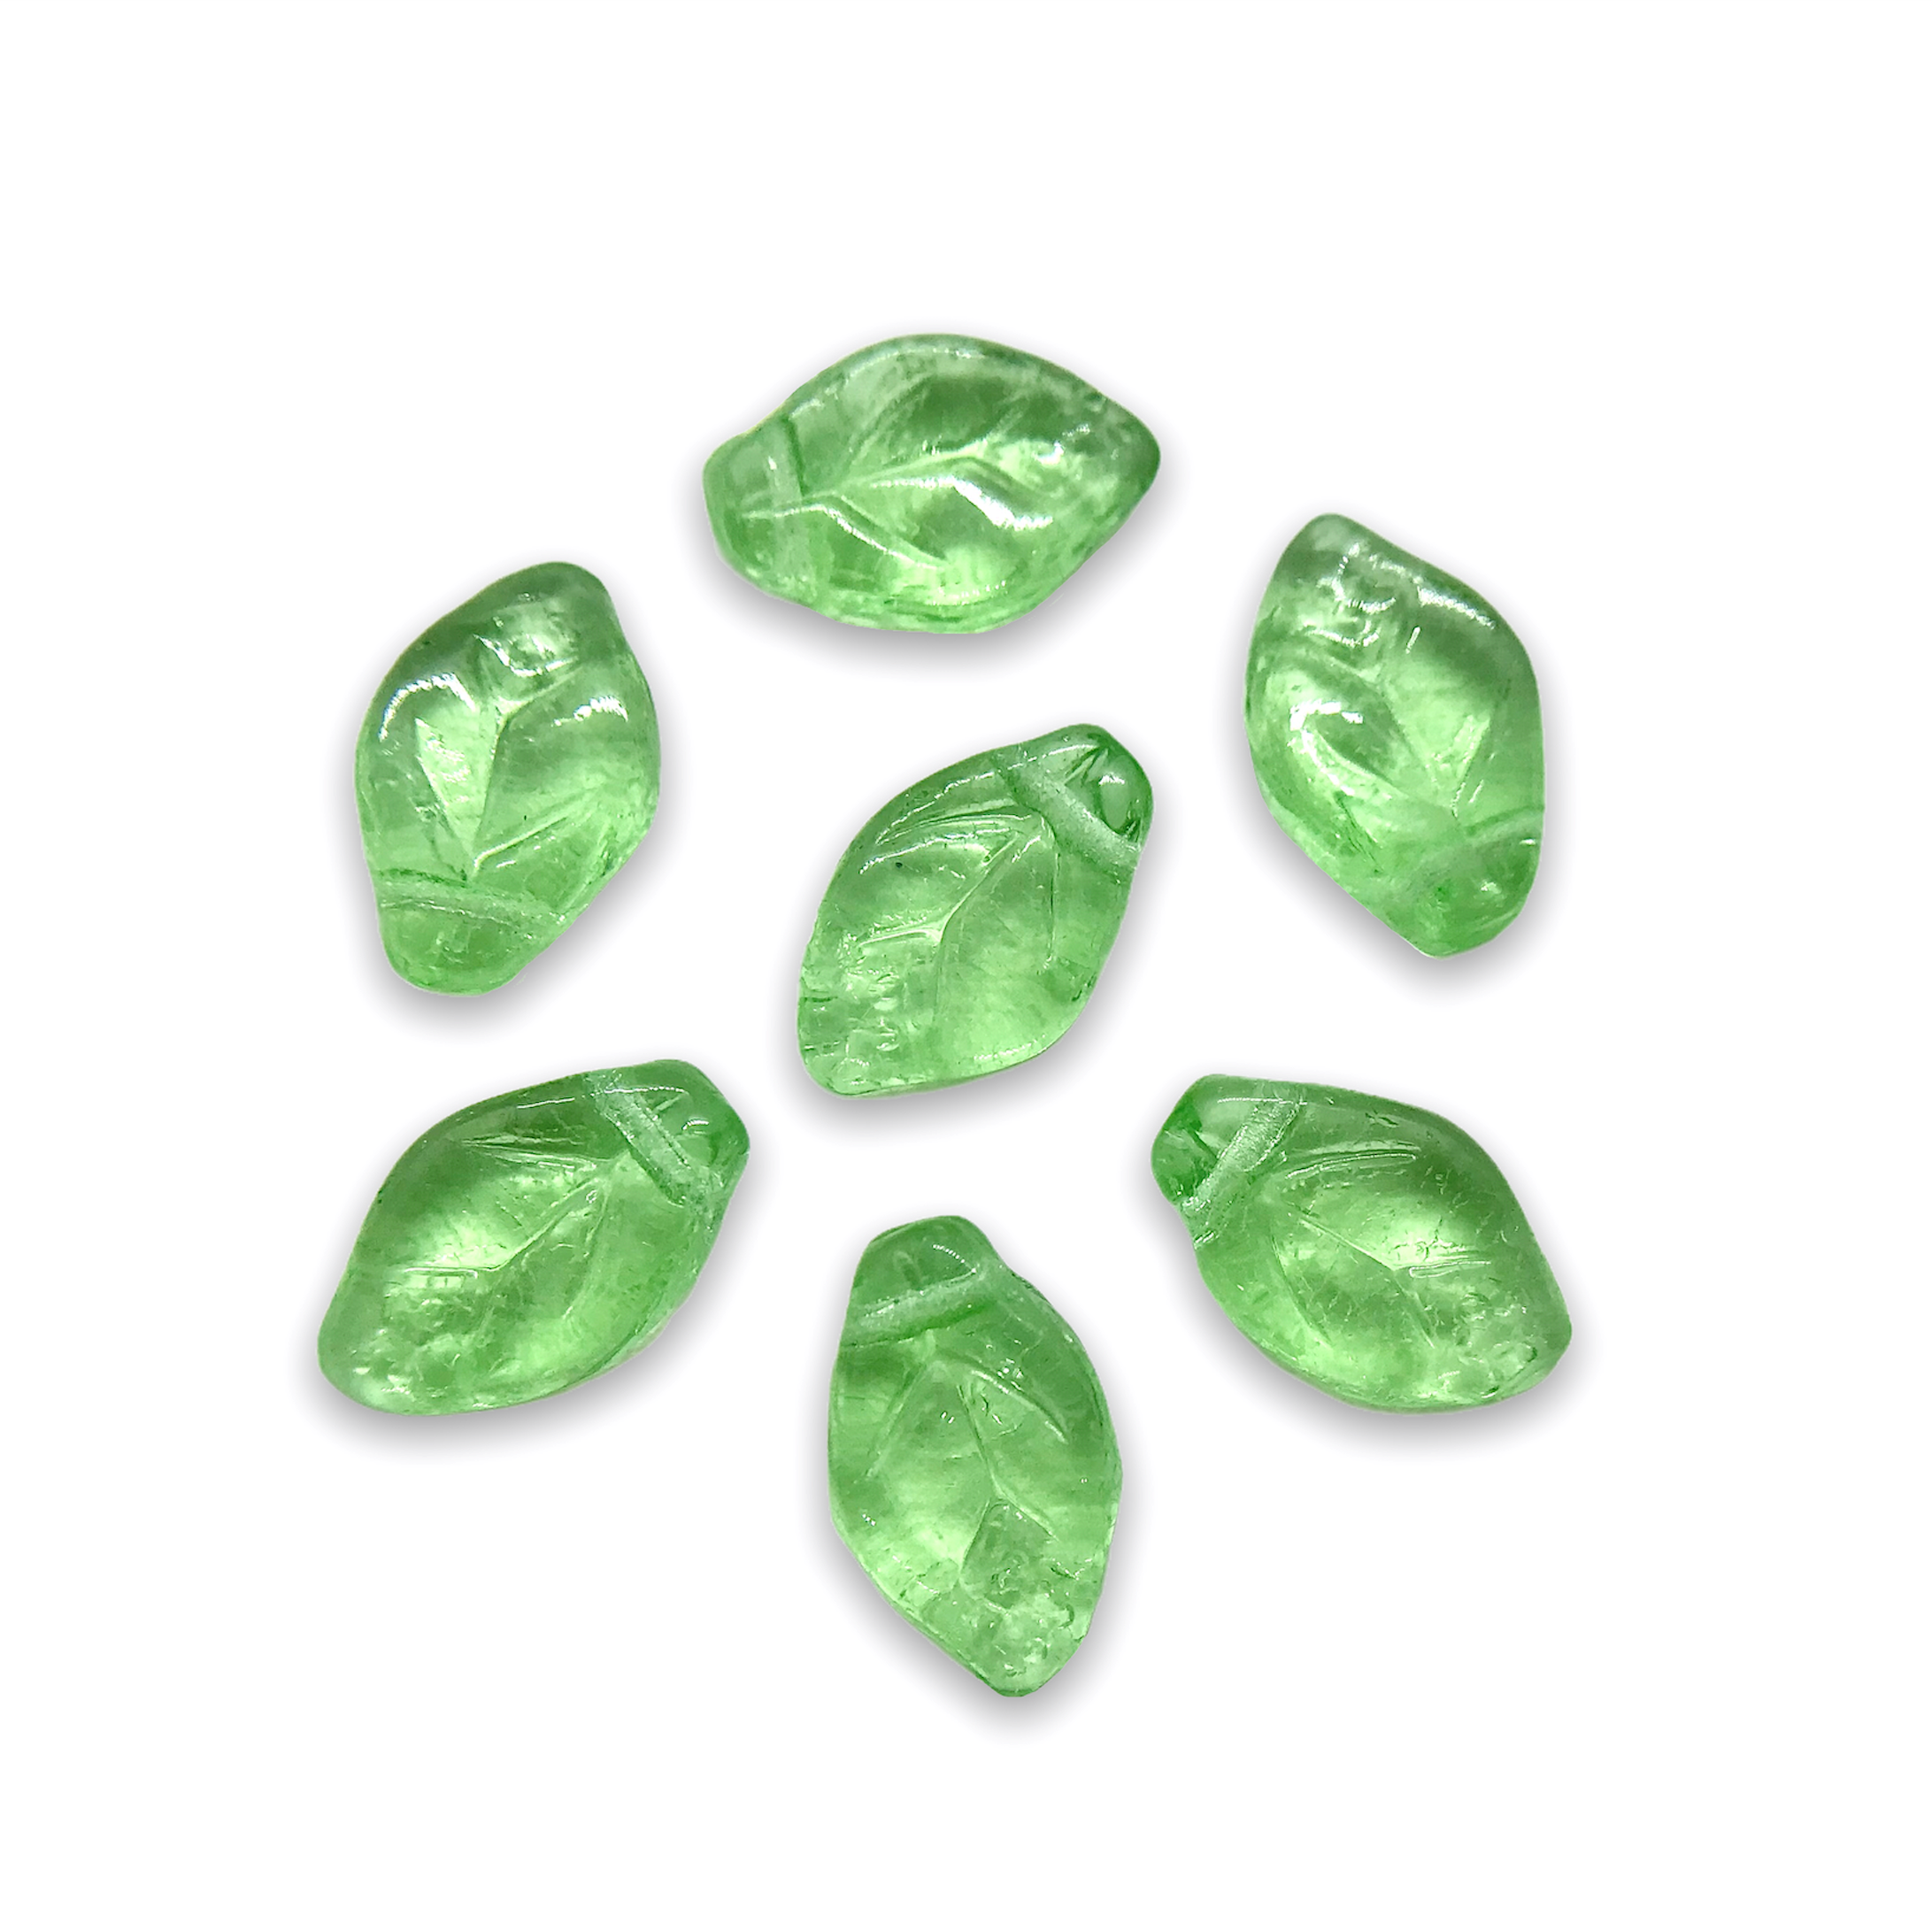 Large Czech Glass Ab Green Leaf Beads, Leaves, Nature, 25x14mm